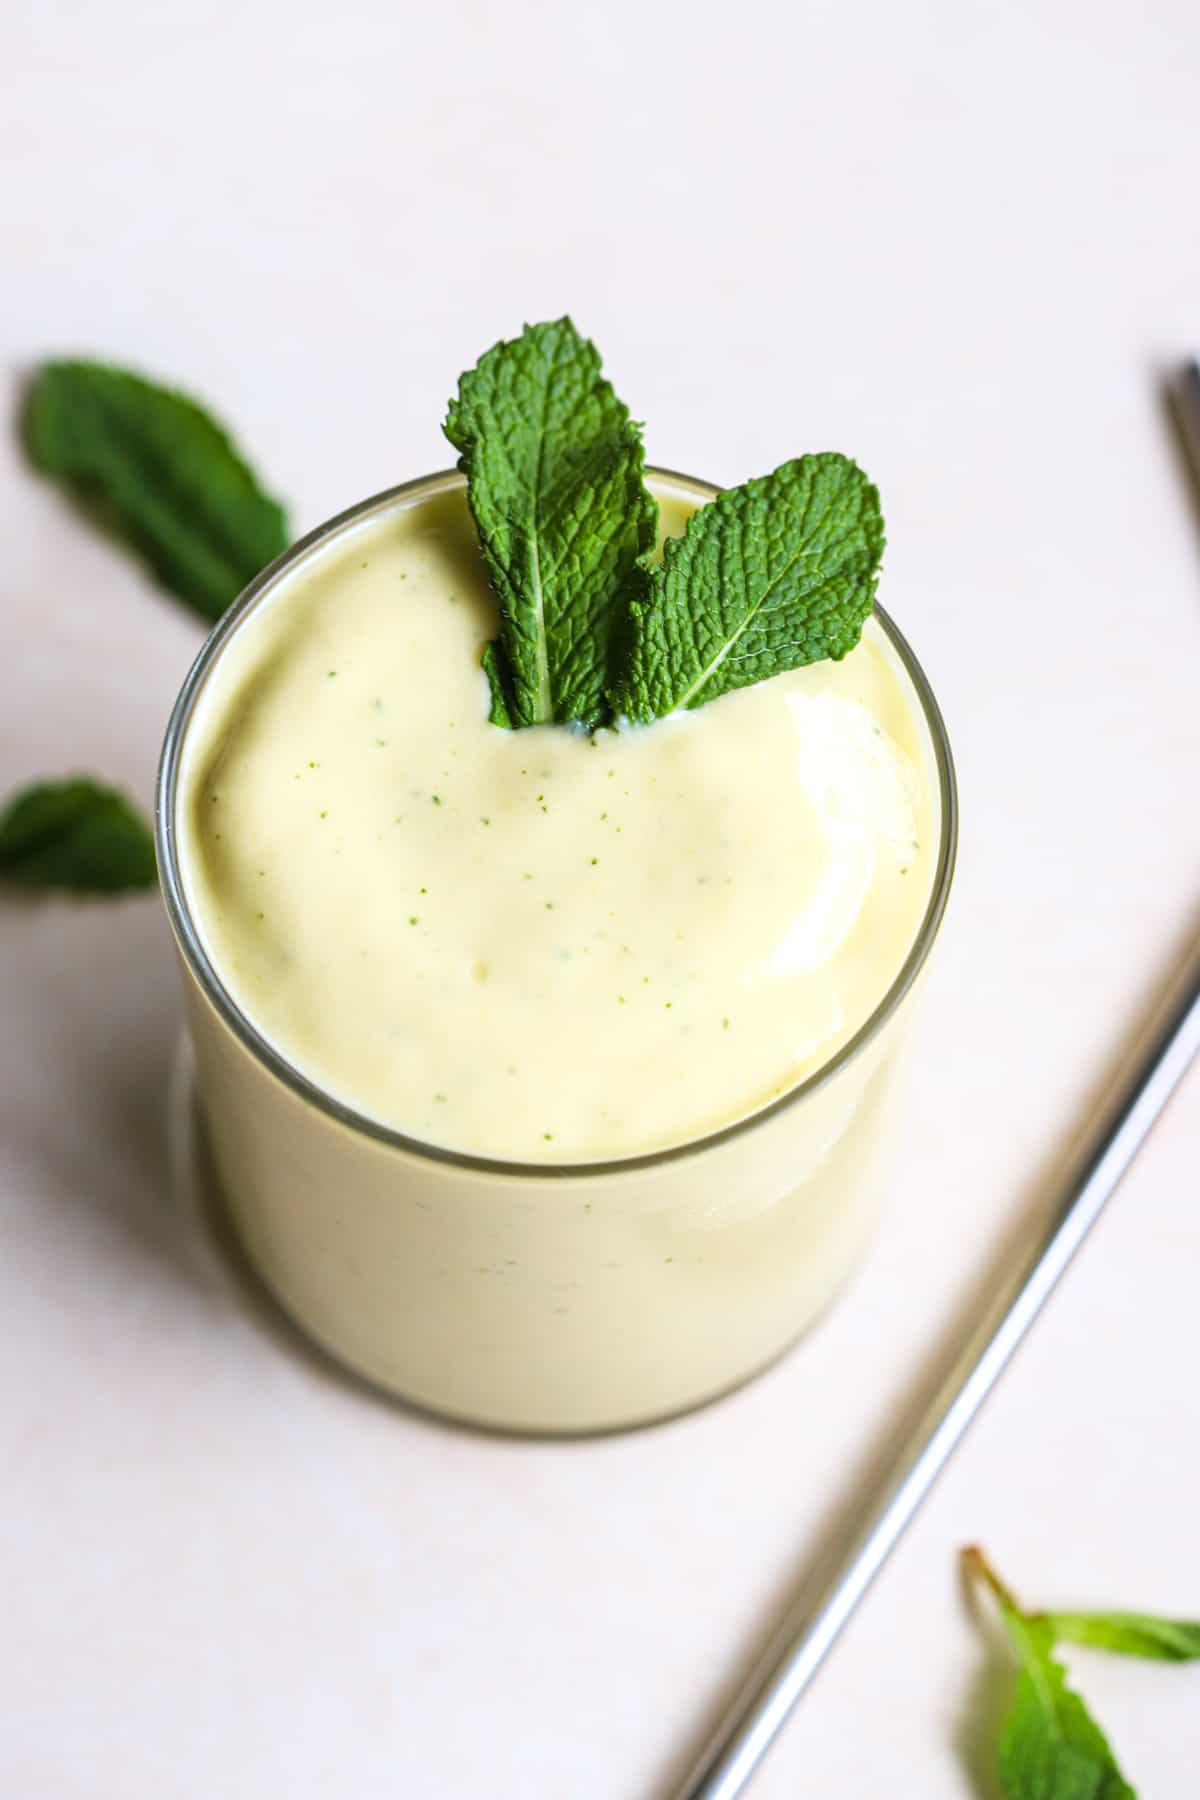 Mango mint smoothie in small glass with fresh mint leaves and stainless steel straw on side, on light beige and white surface